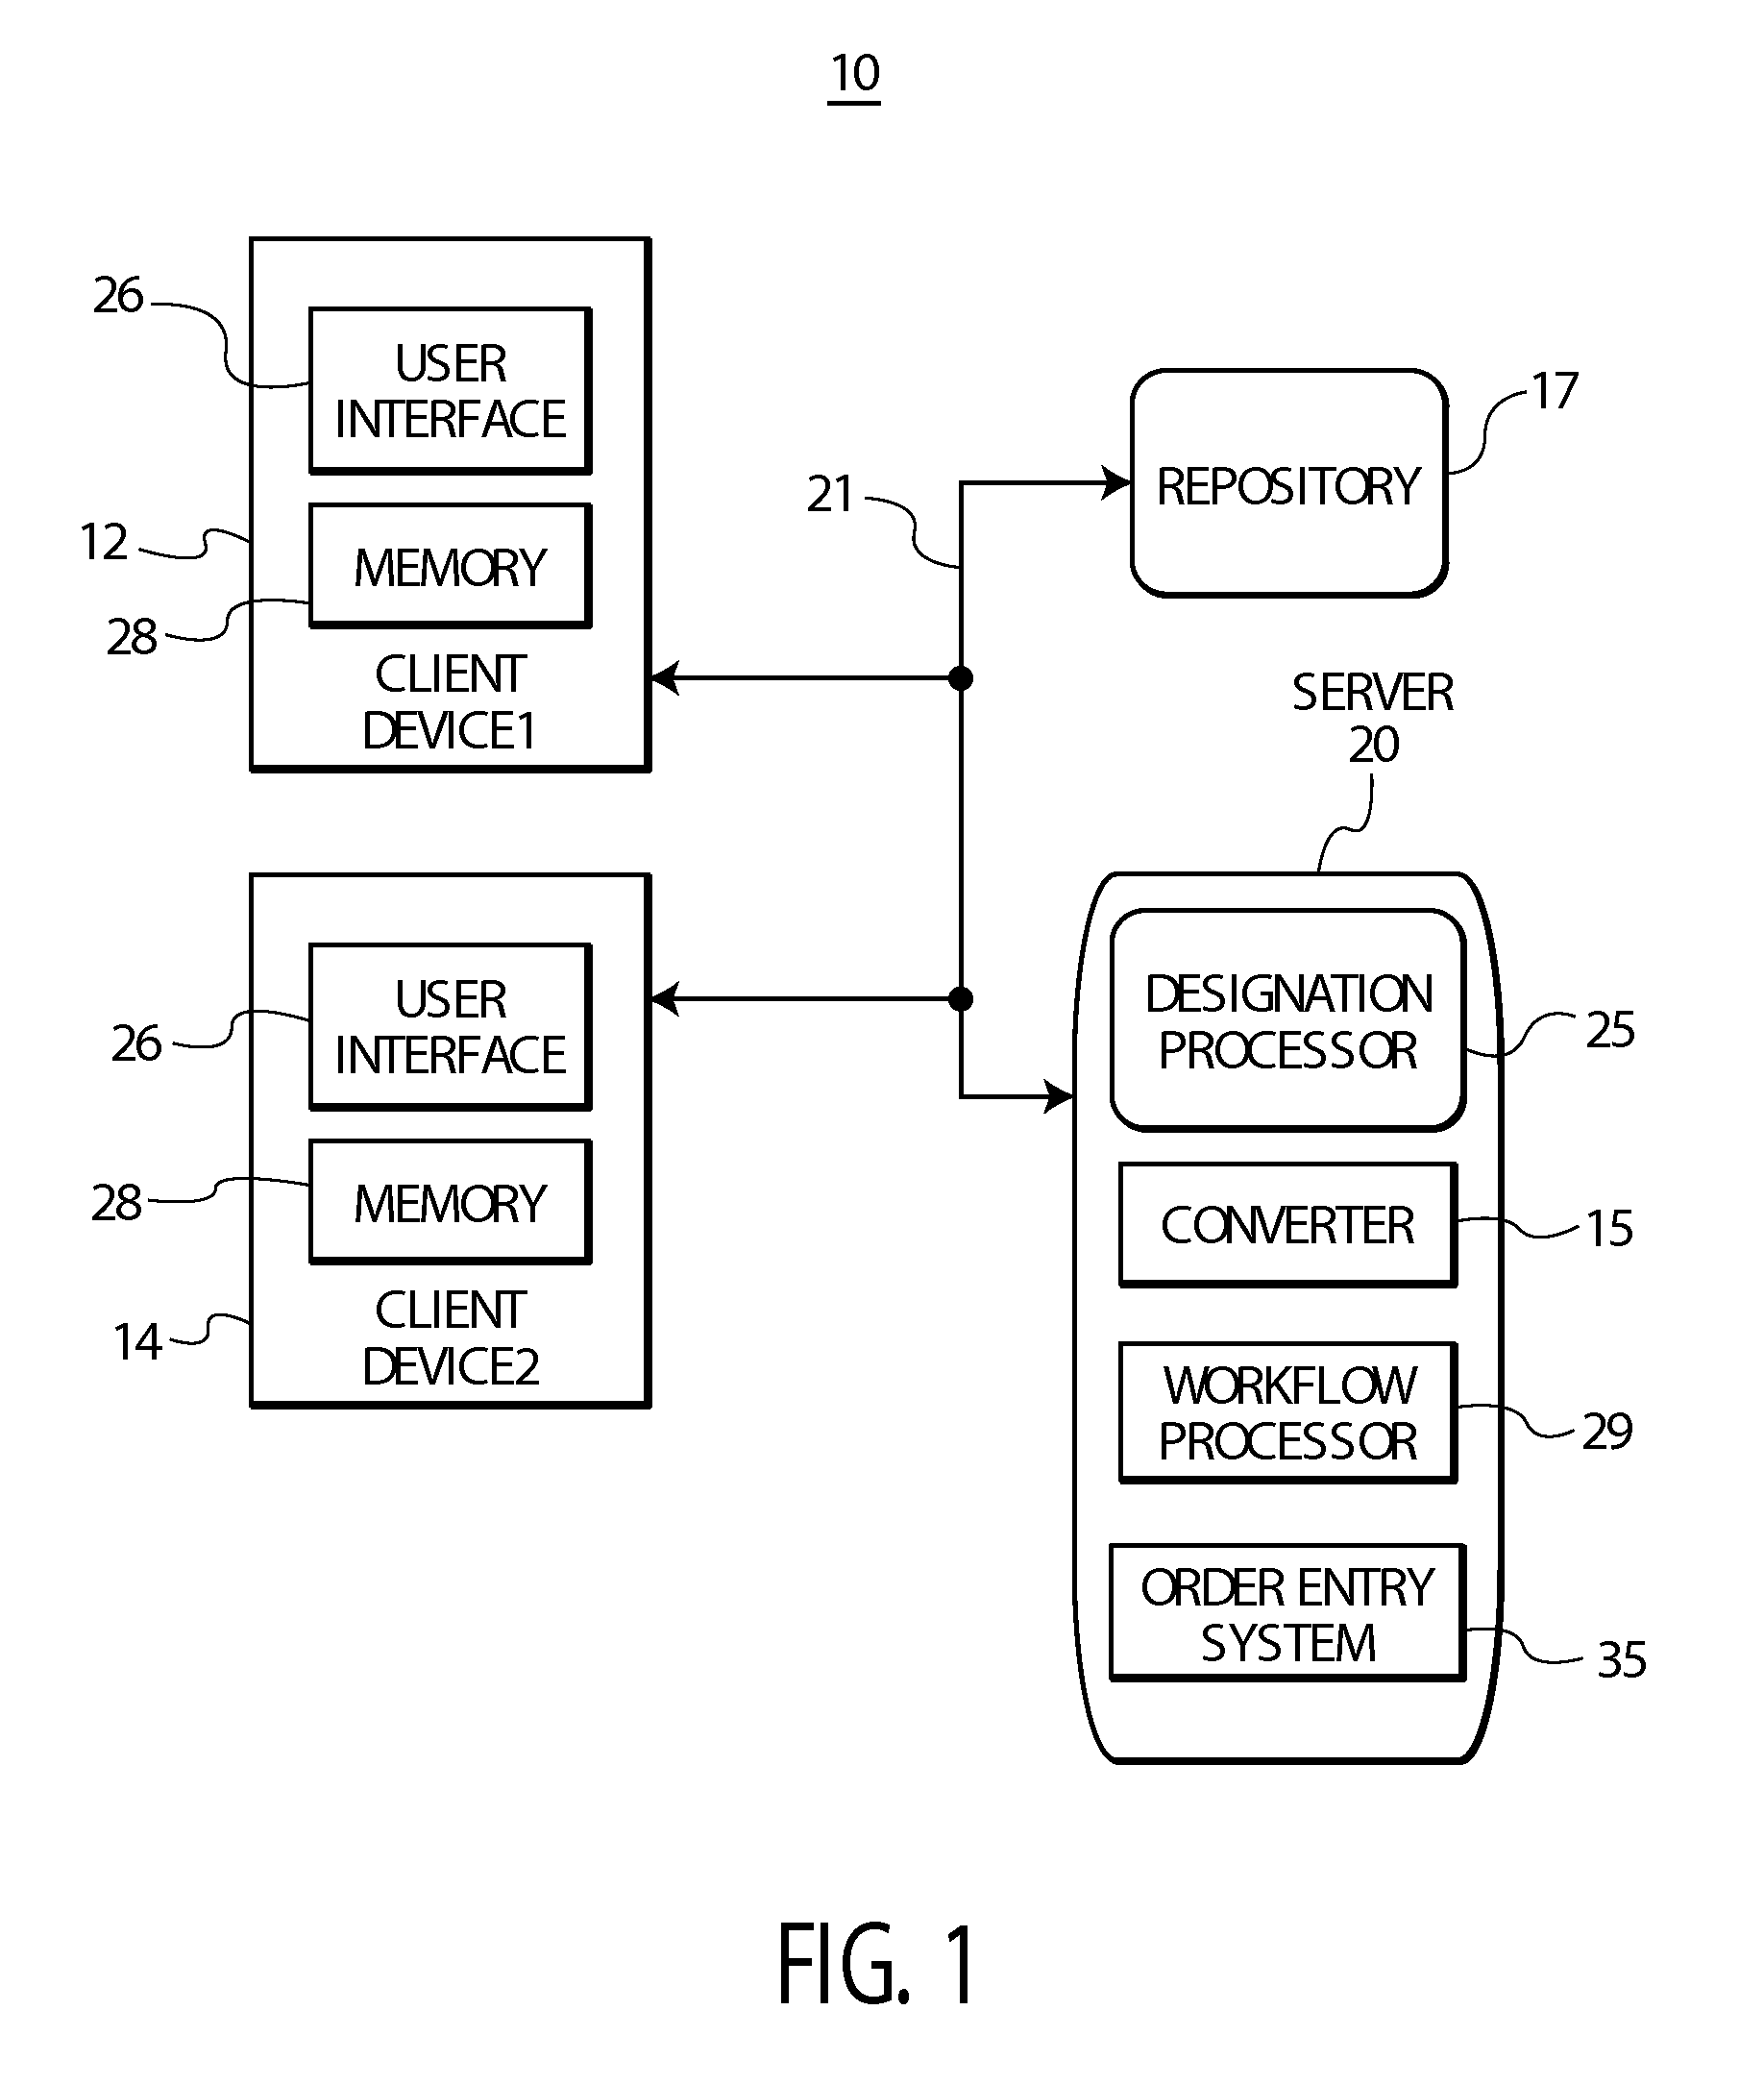 System for Providing an Overview of Patient Medical Condition